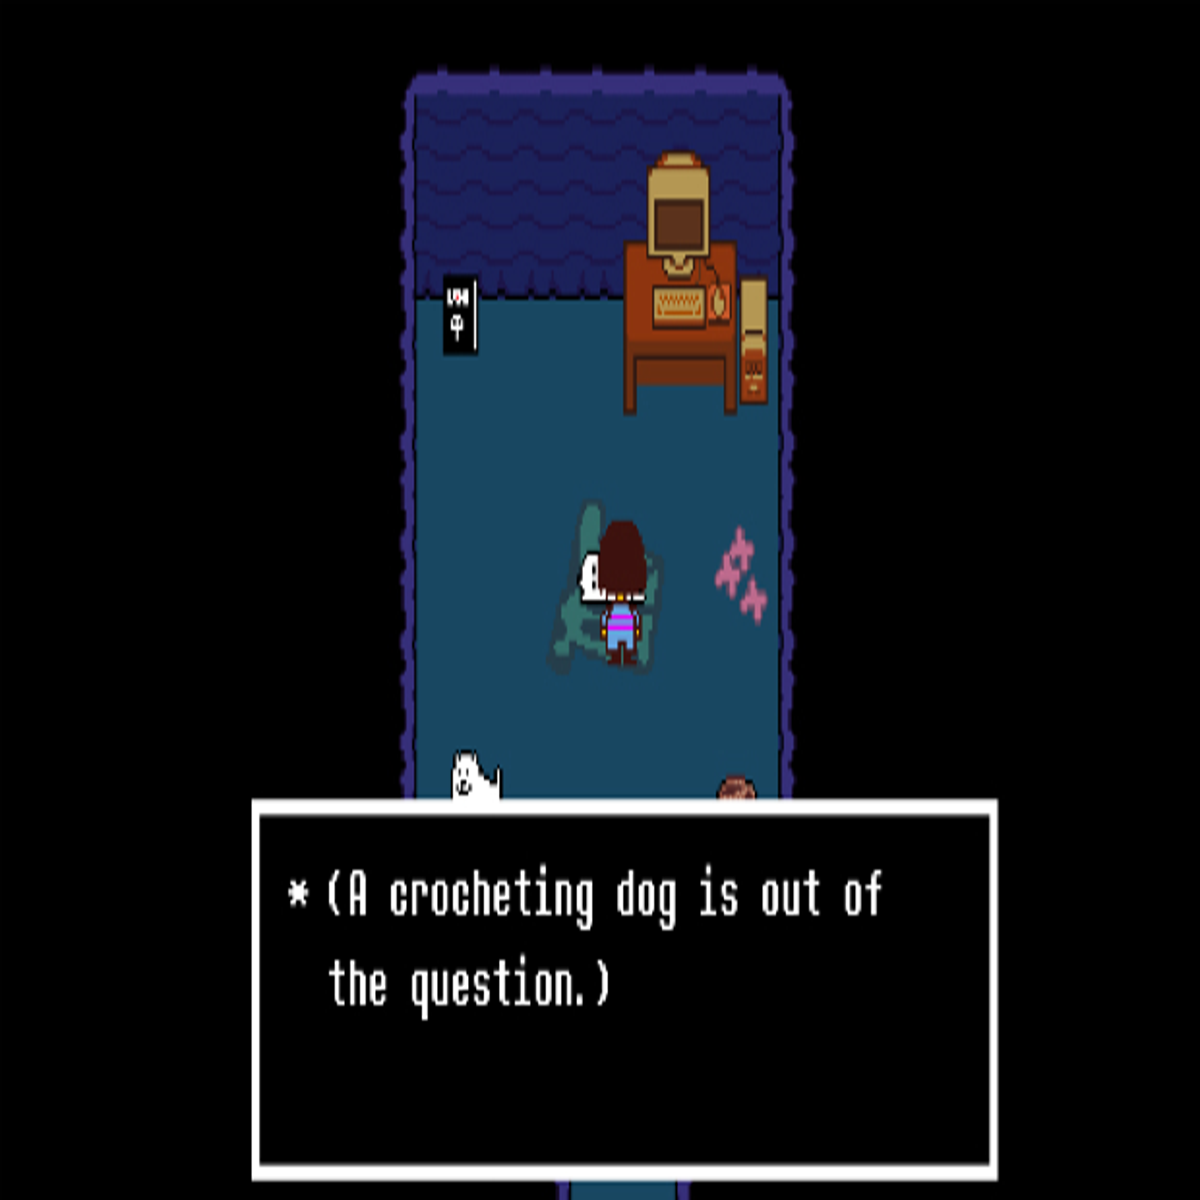 Deltarune isn't coming out this year, but here's some more Toby Fox bangers